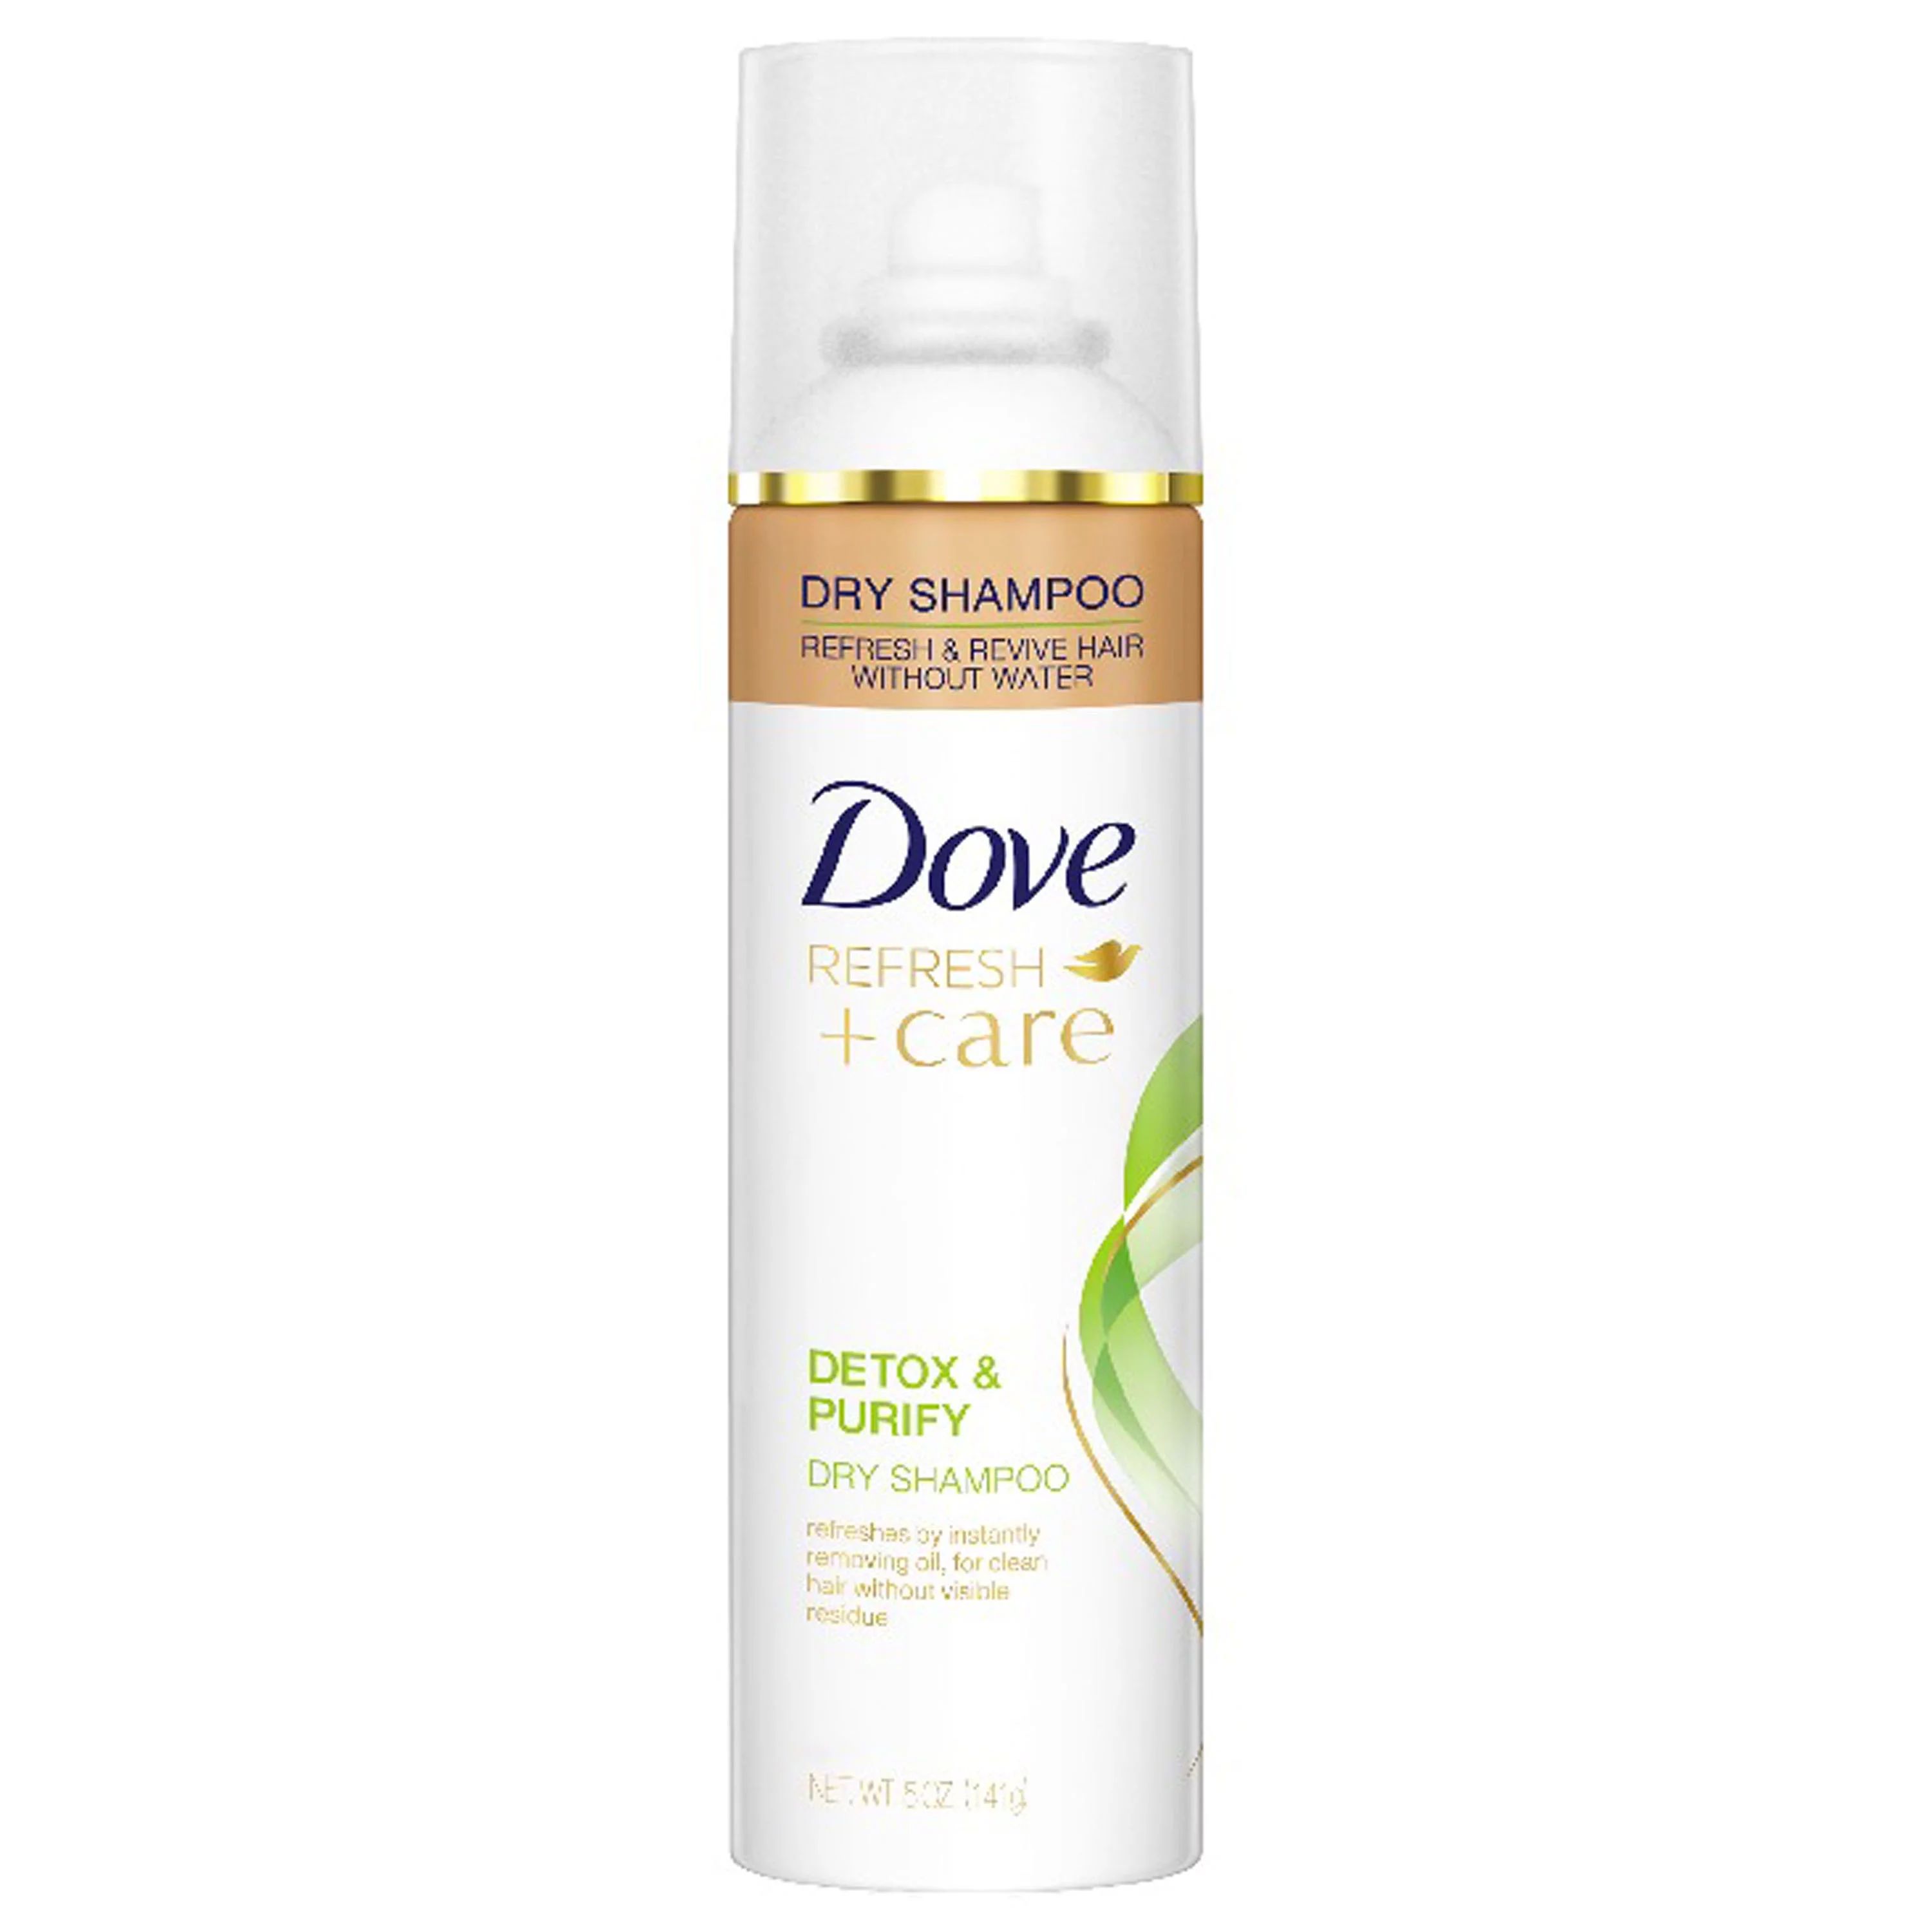 Dove Care Between Washes Dry Shampoo Dry Shampoo for Oily Hair Detox and Purify, 5 oz | Walmart (US)